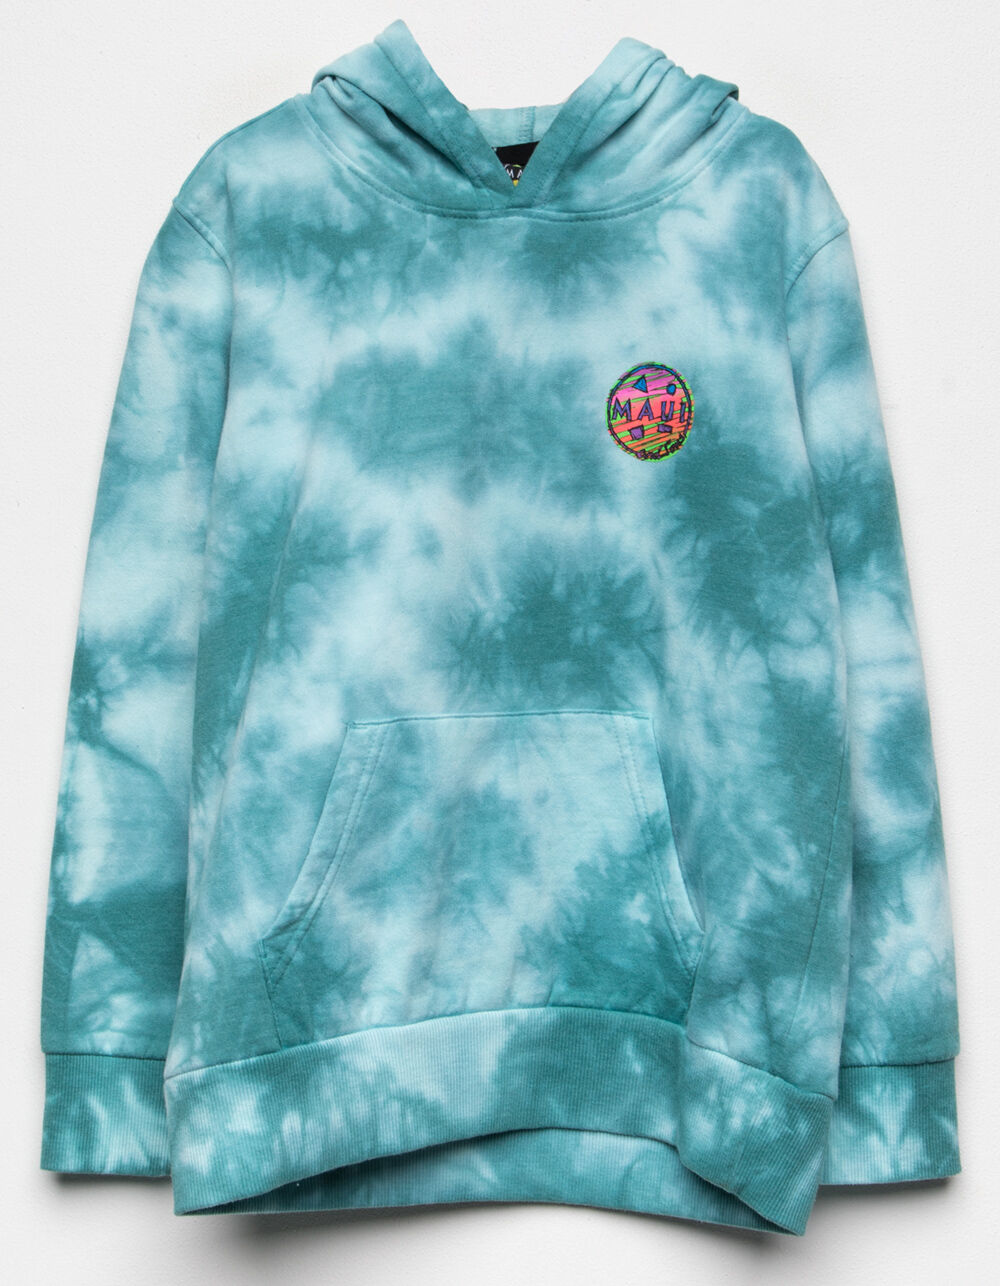 MAUI AND SONS Tie Dye Girls Hoodie - BLUE COMBO | Tillys